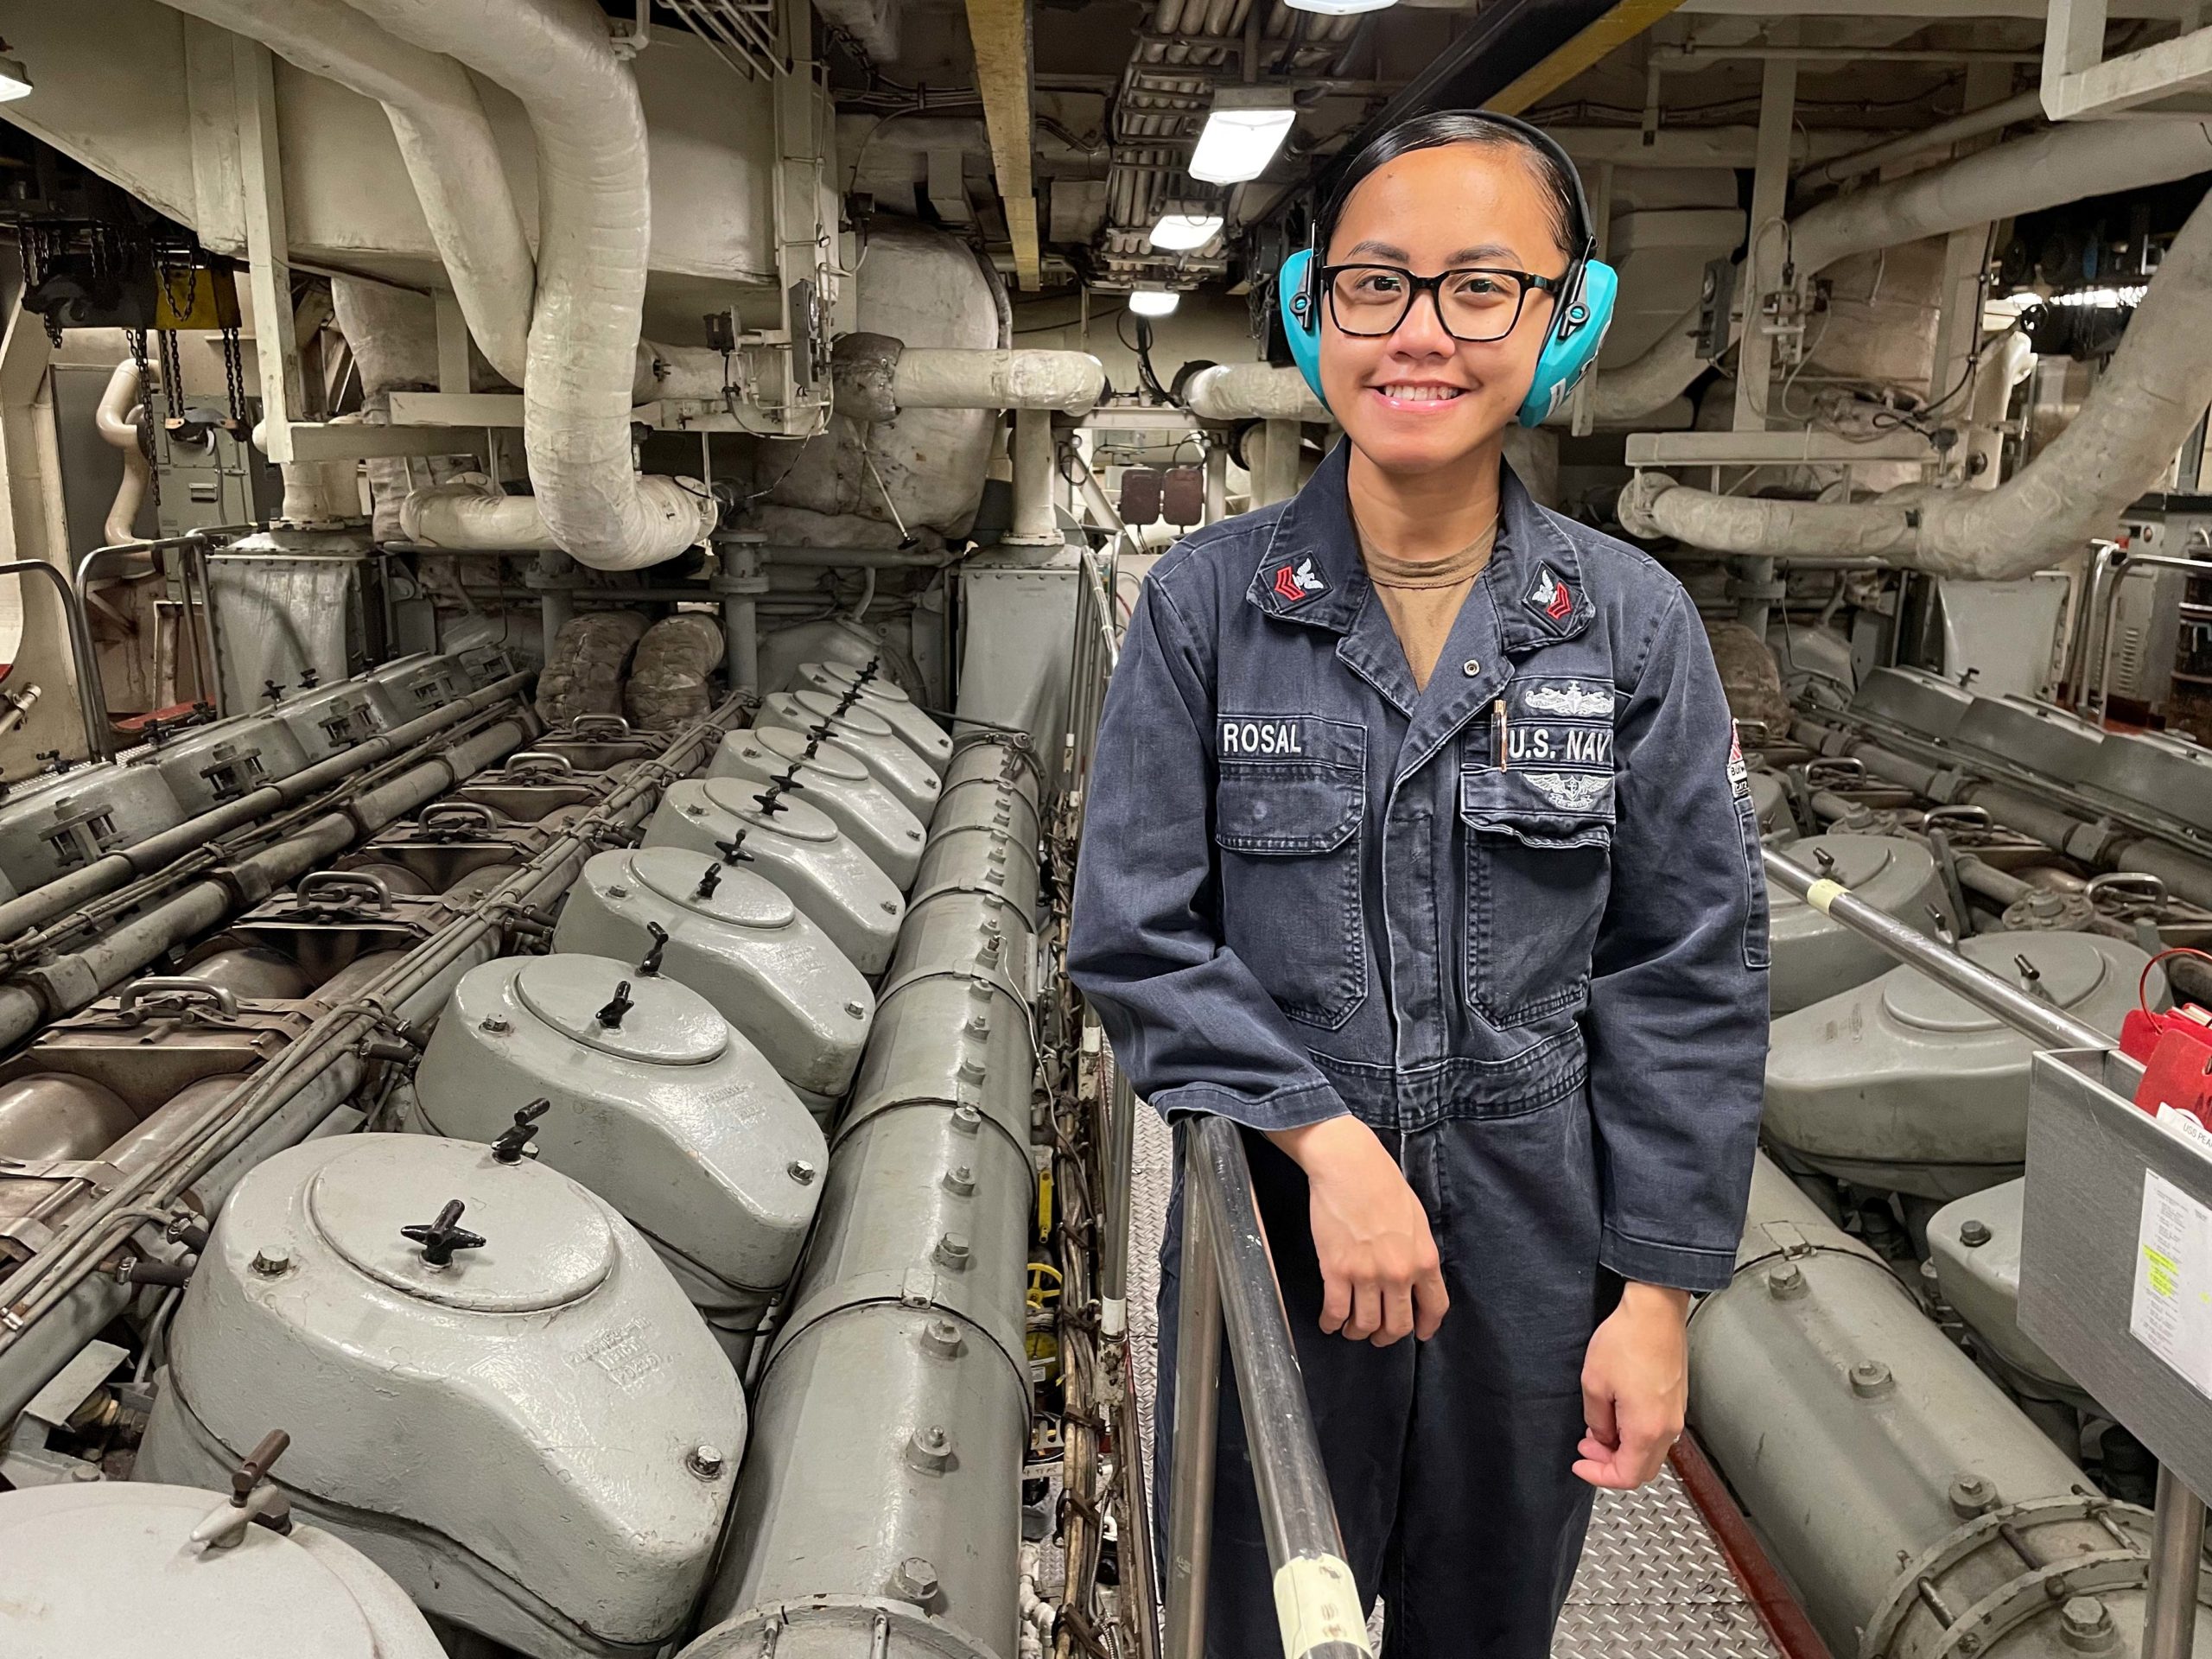  Petty Officer 1st Class Maria Rosal joined the Navy for the opportunities the military provides. (Photo: U.S. NAVY)